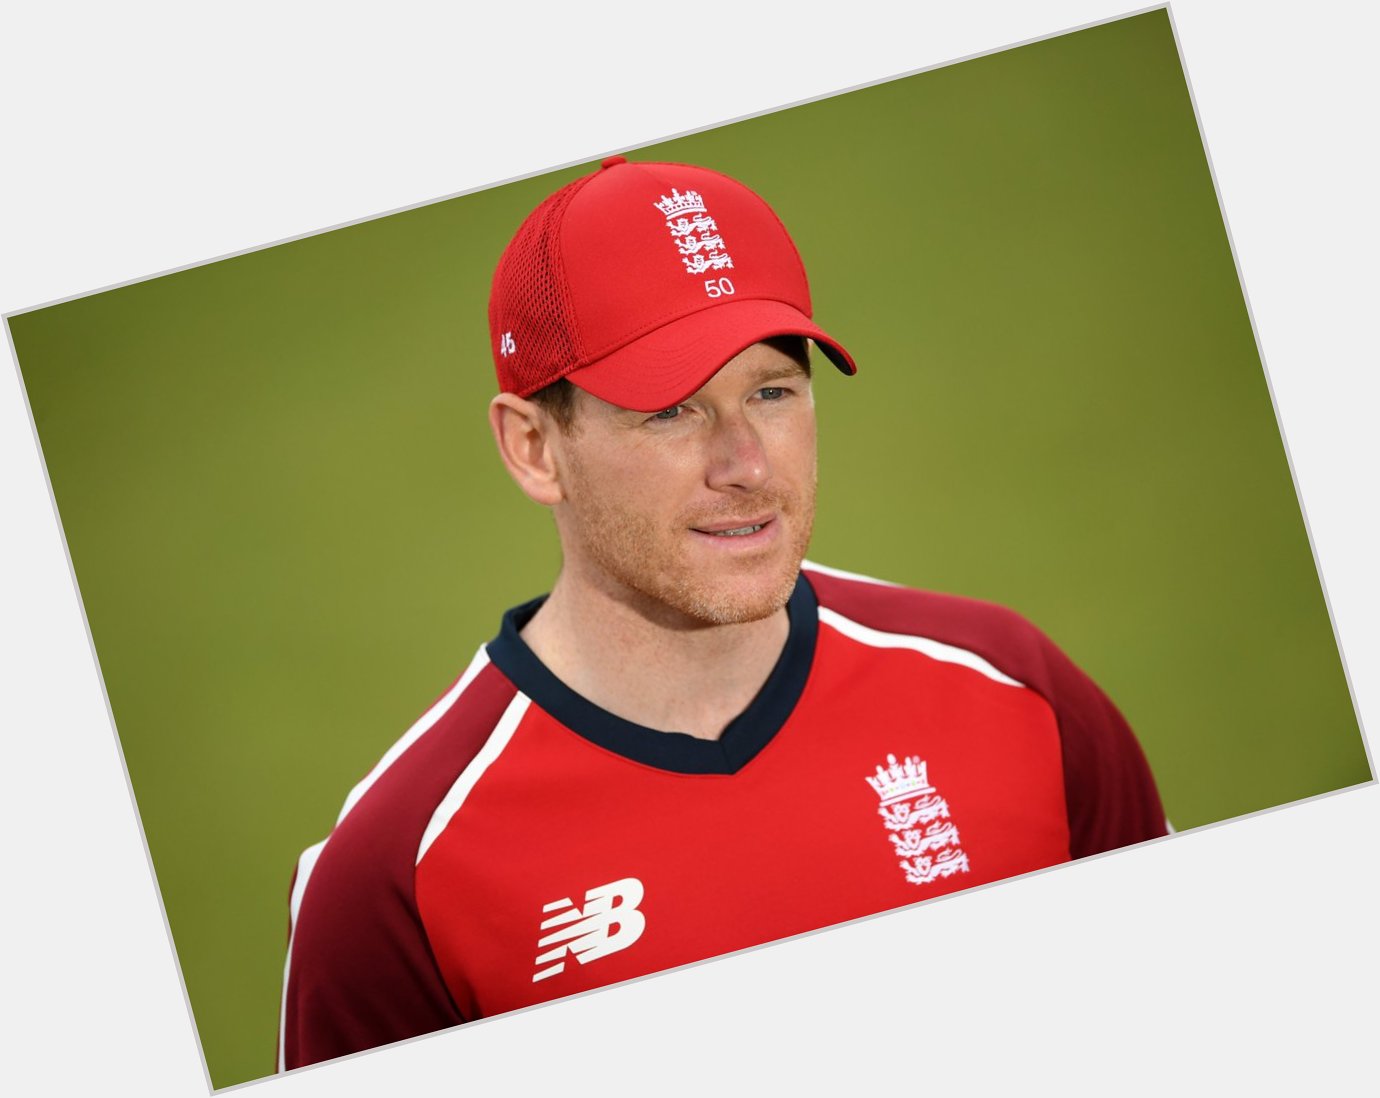 Happy Birthday The Rock Of England\s ODI and T20I Sides

READ -  